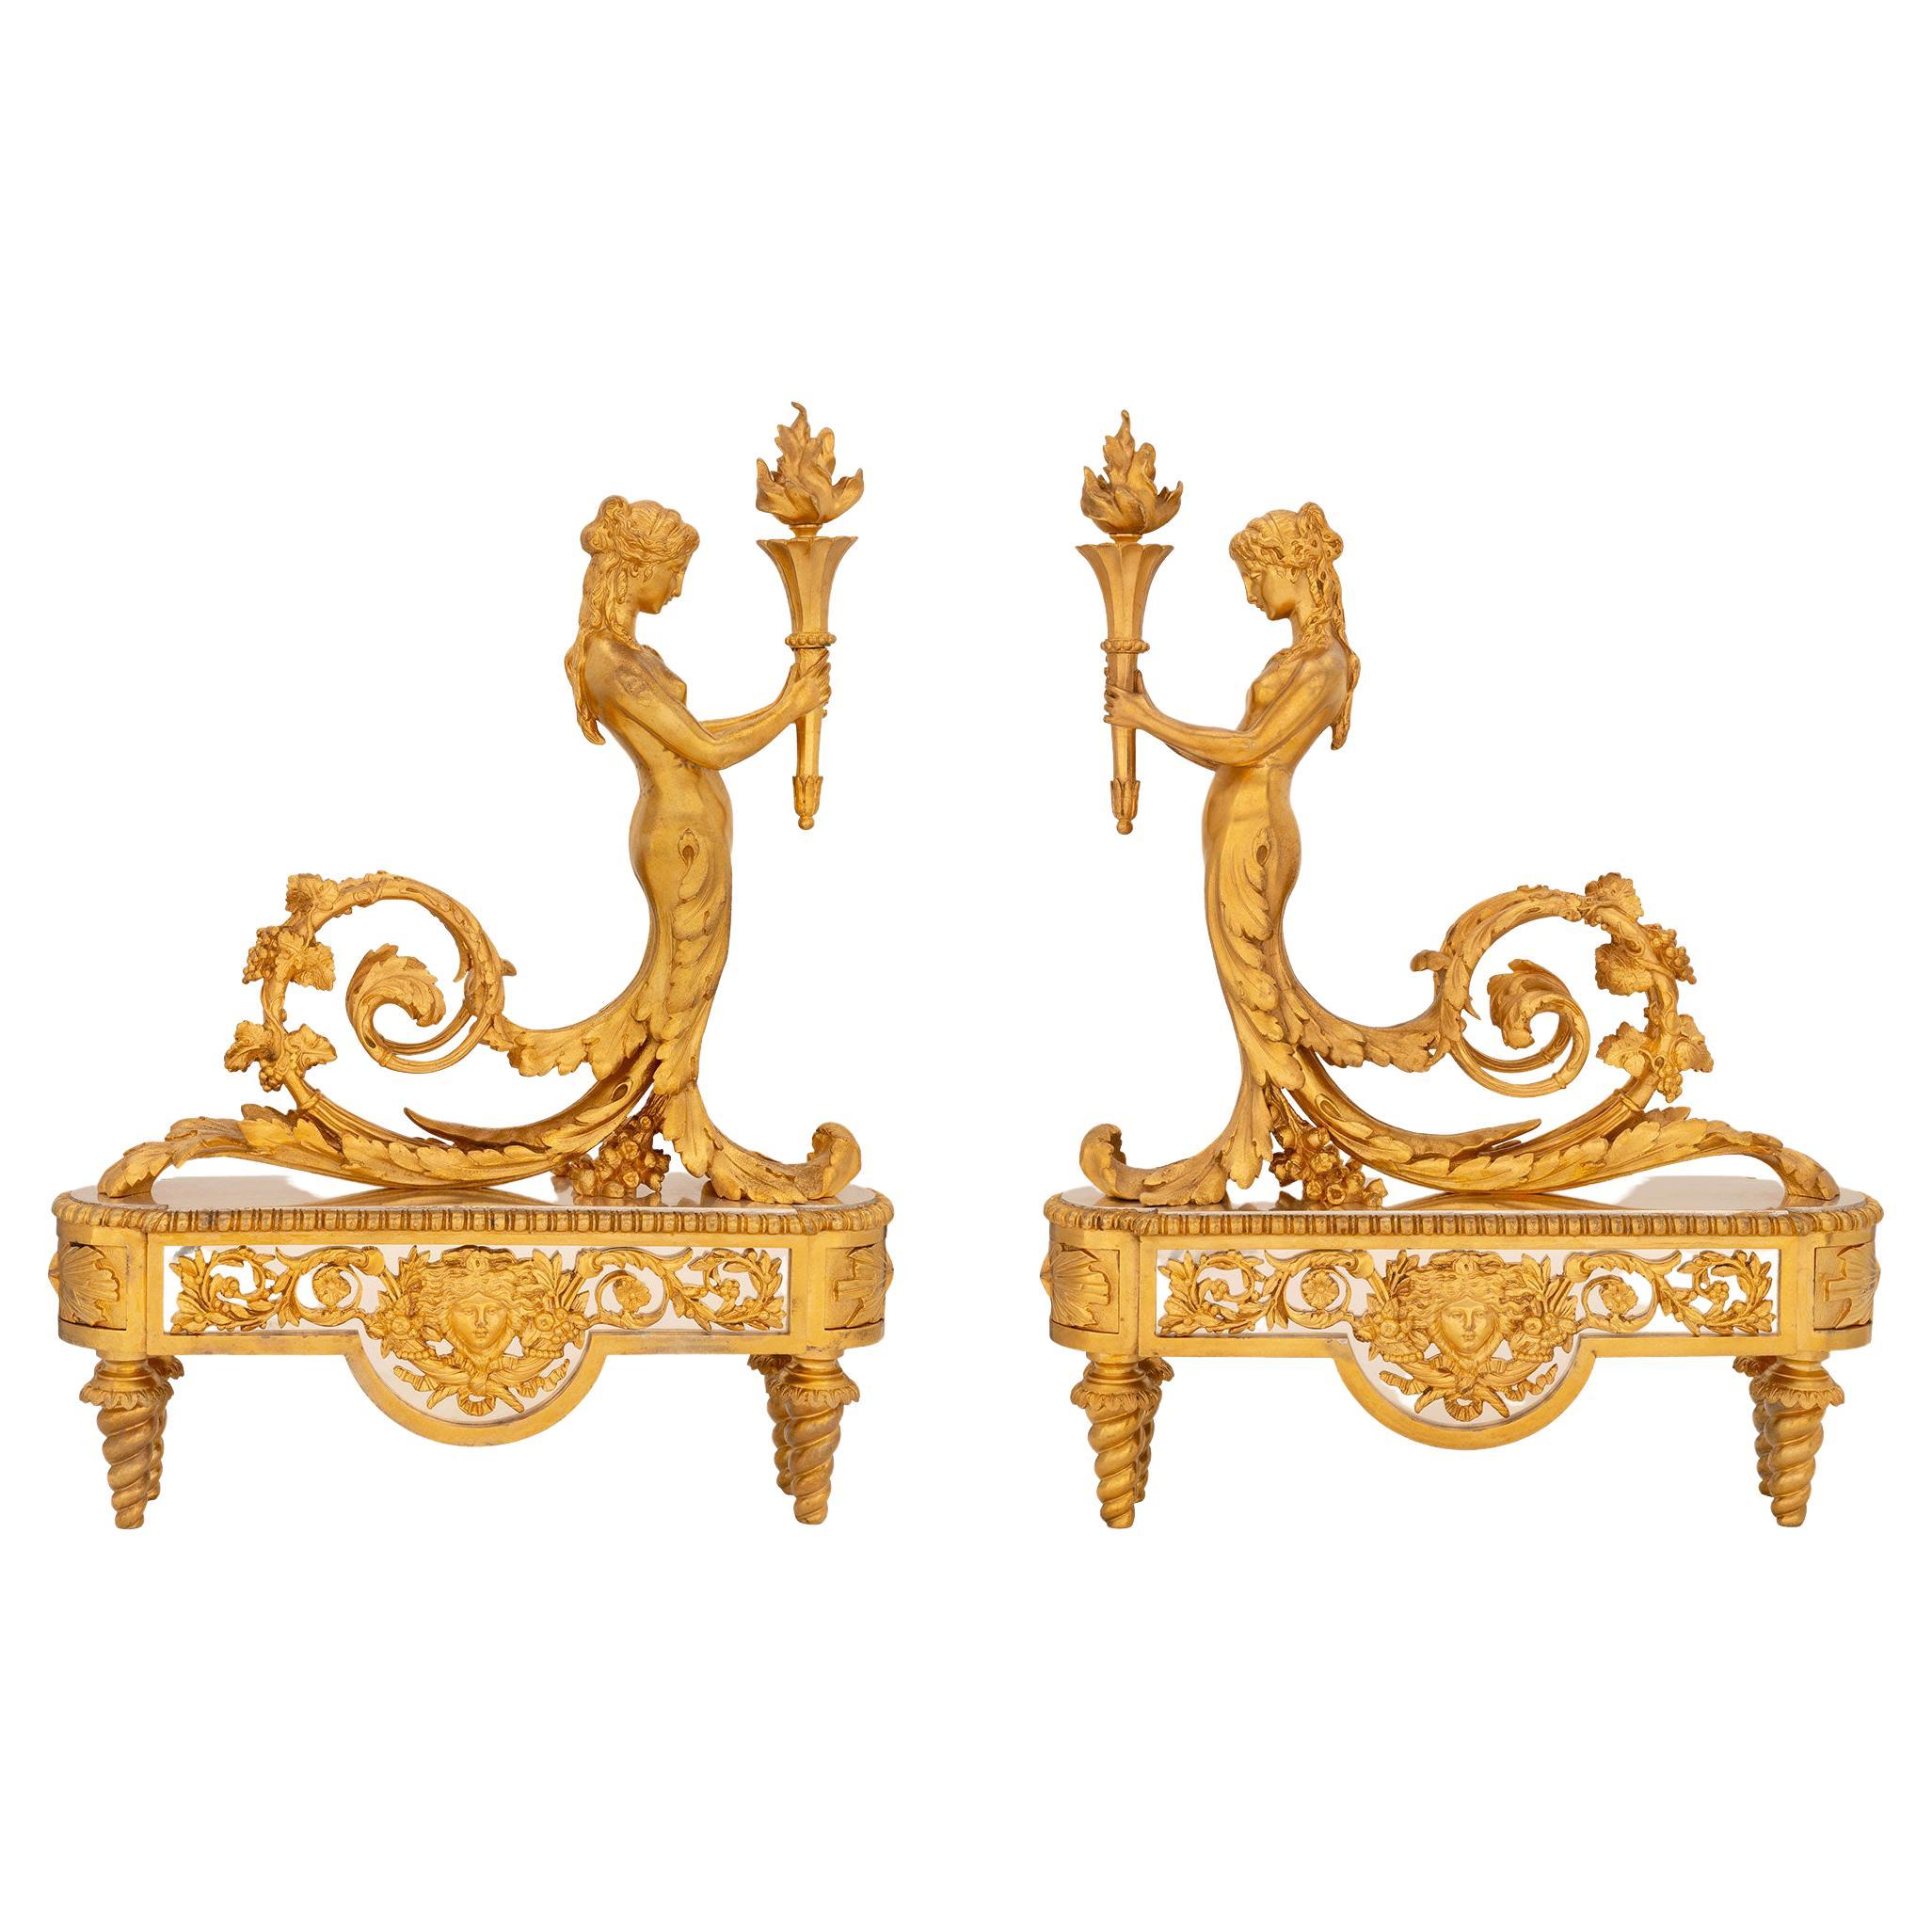 Pair of French 19th Century Louis XVI Style Ormolu and Silvered Bronze Andirons